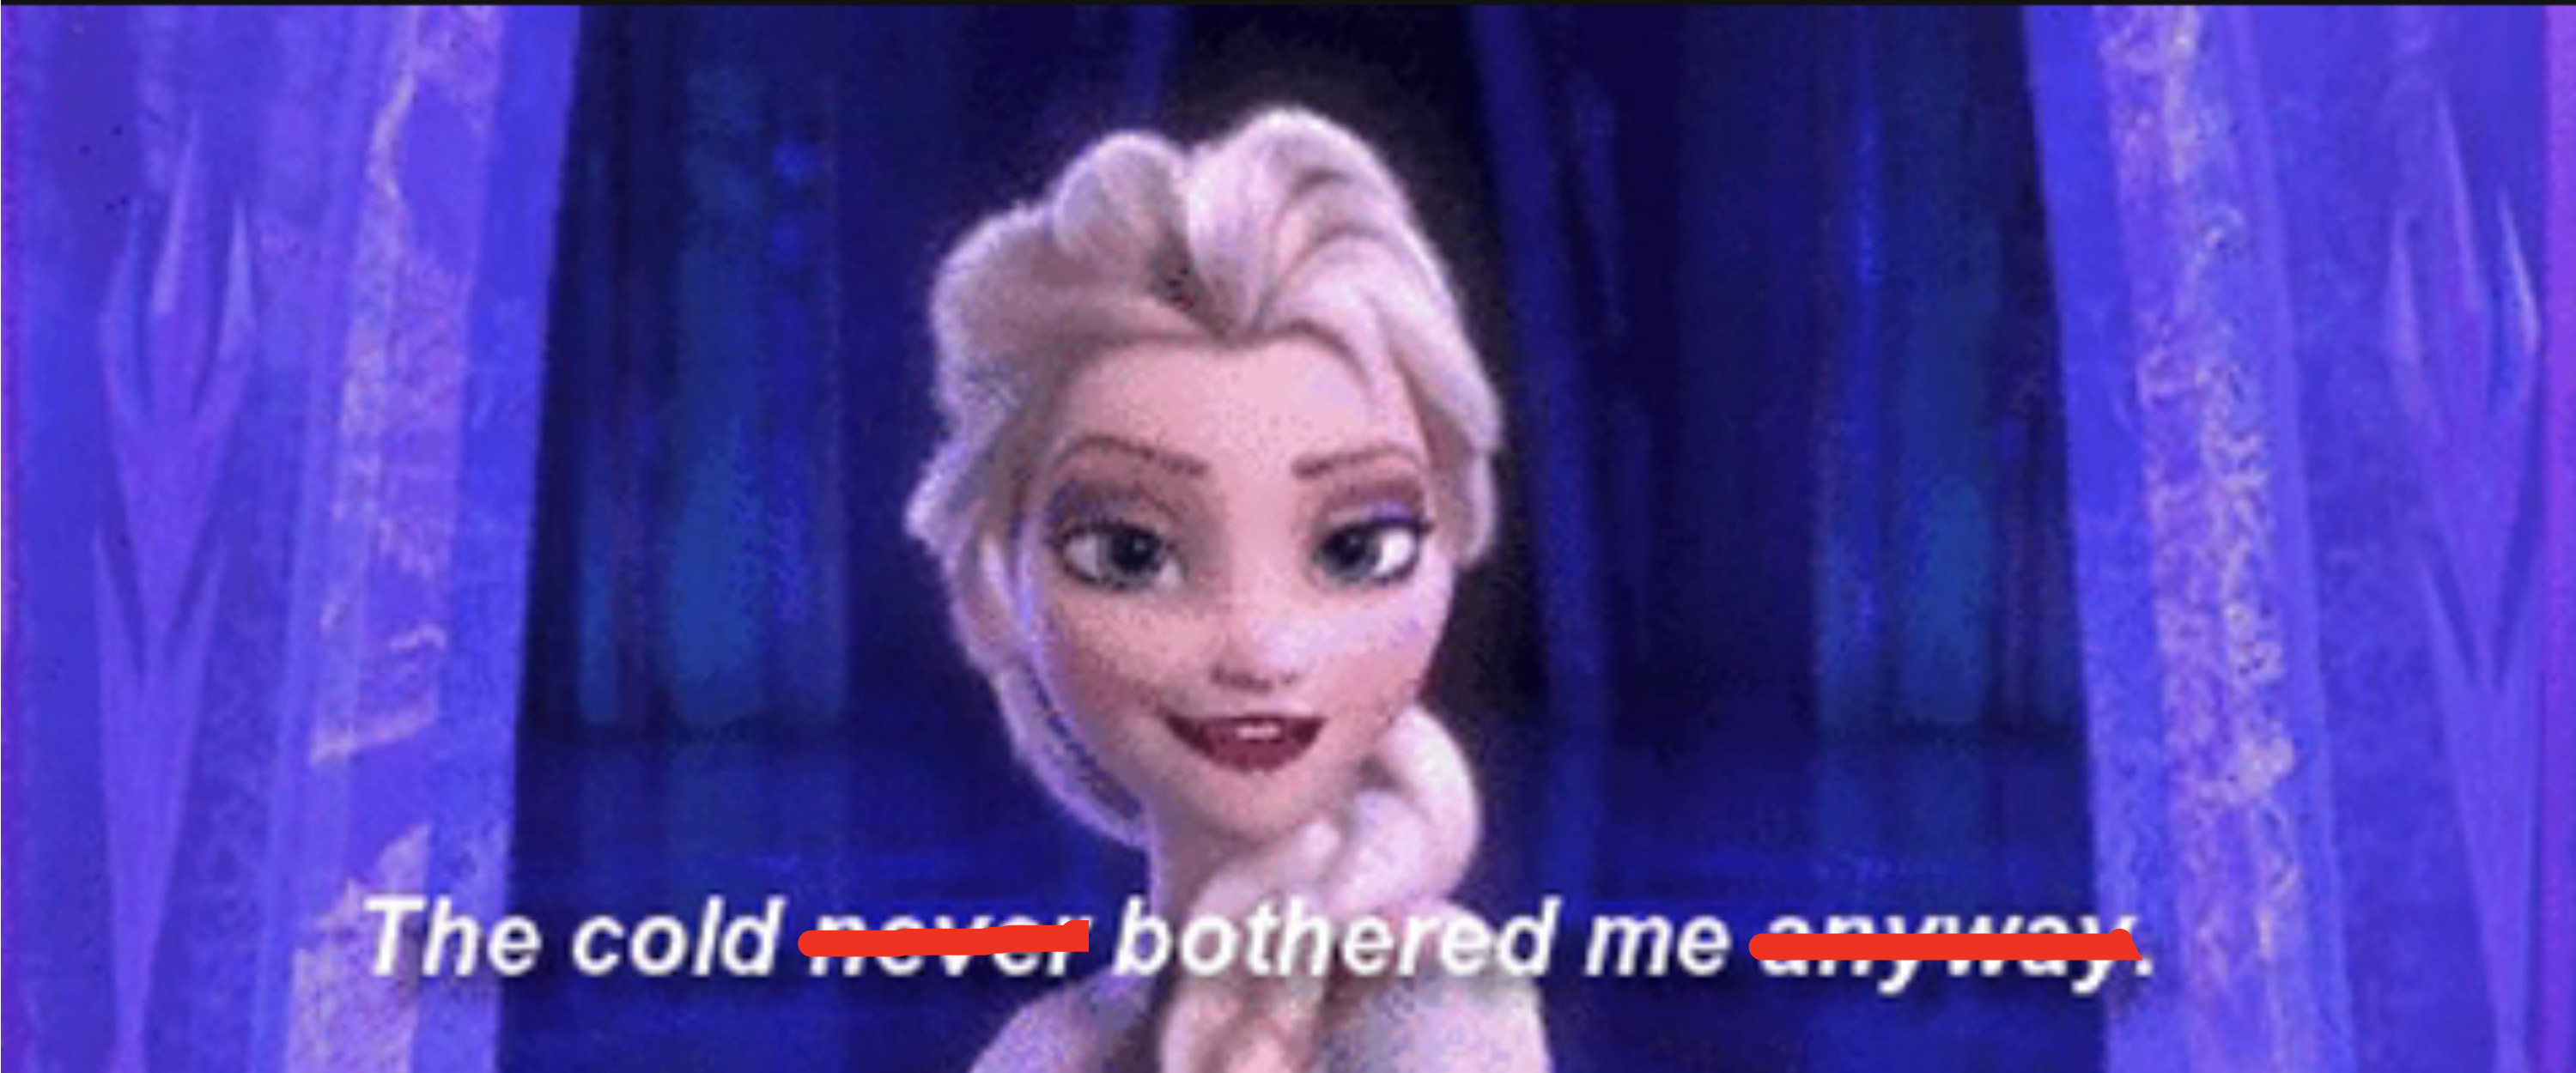 Elsa saying the cold bothered her